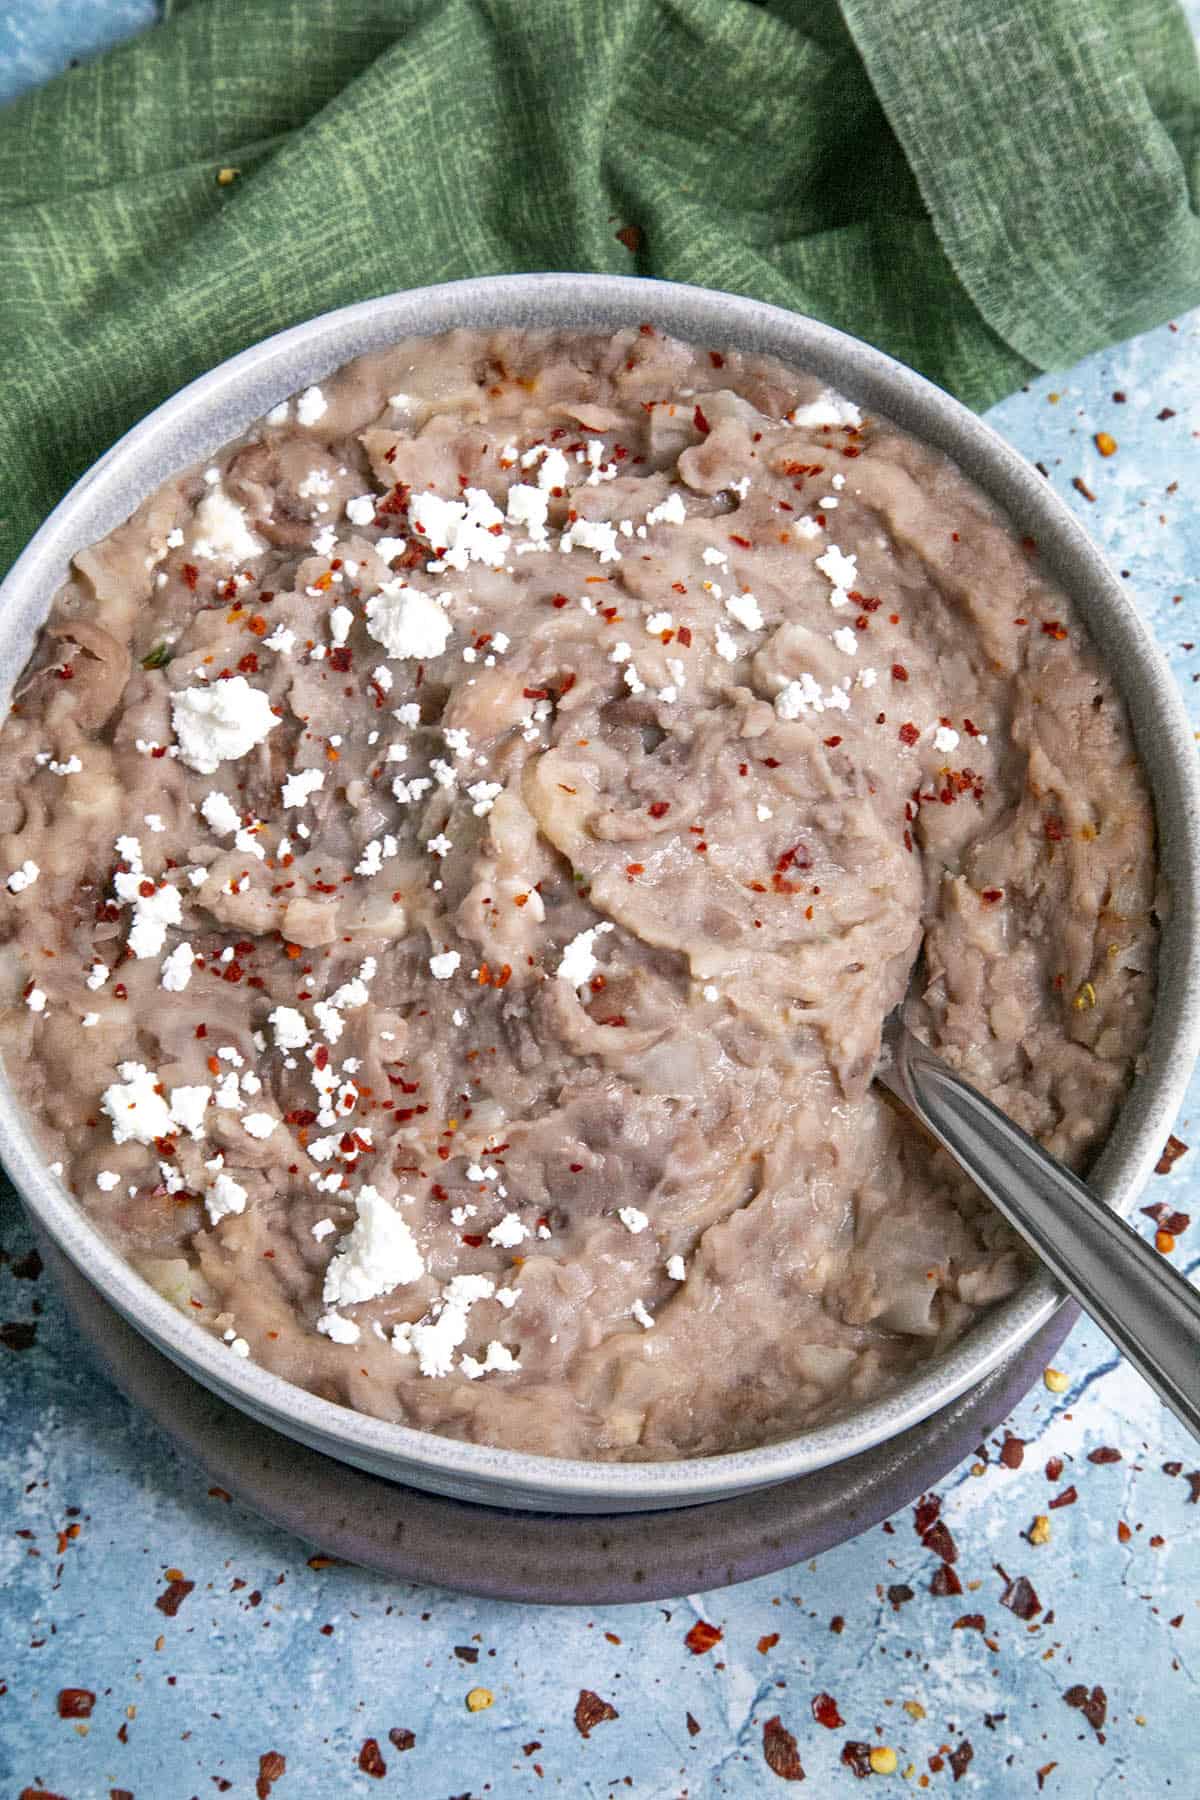 Homemade Refried Bean in a bowl with a spoon